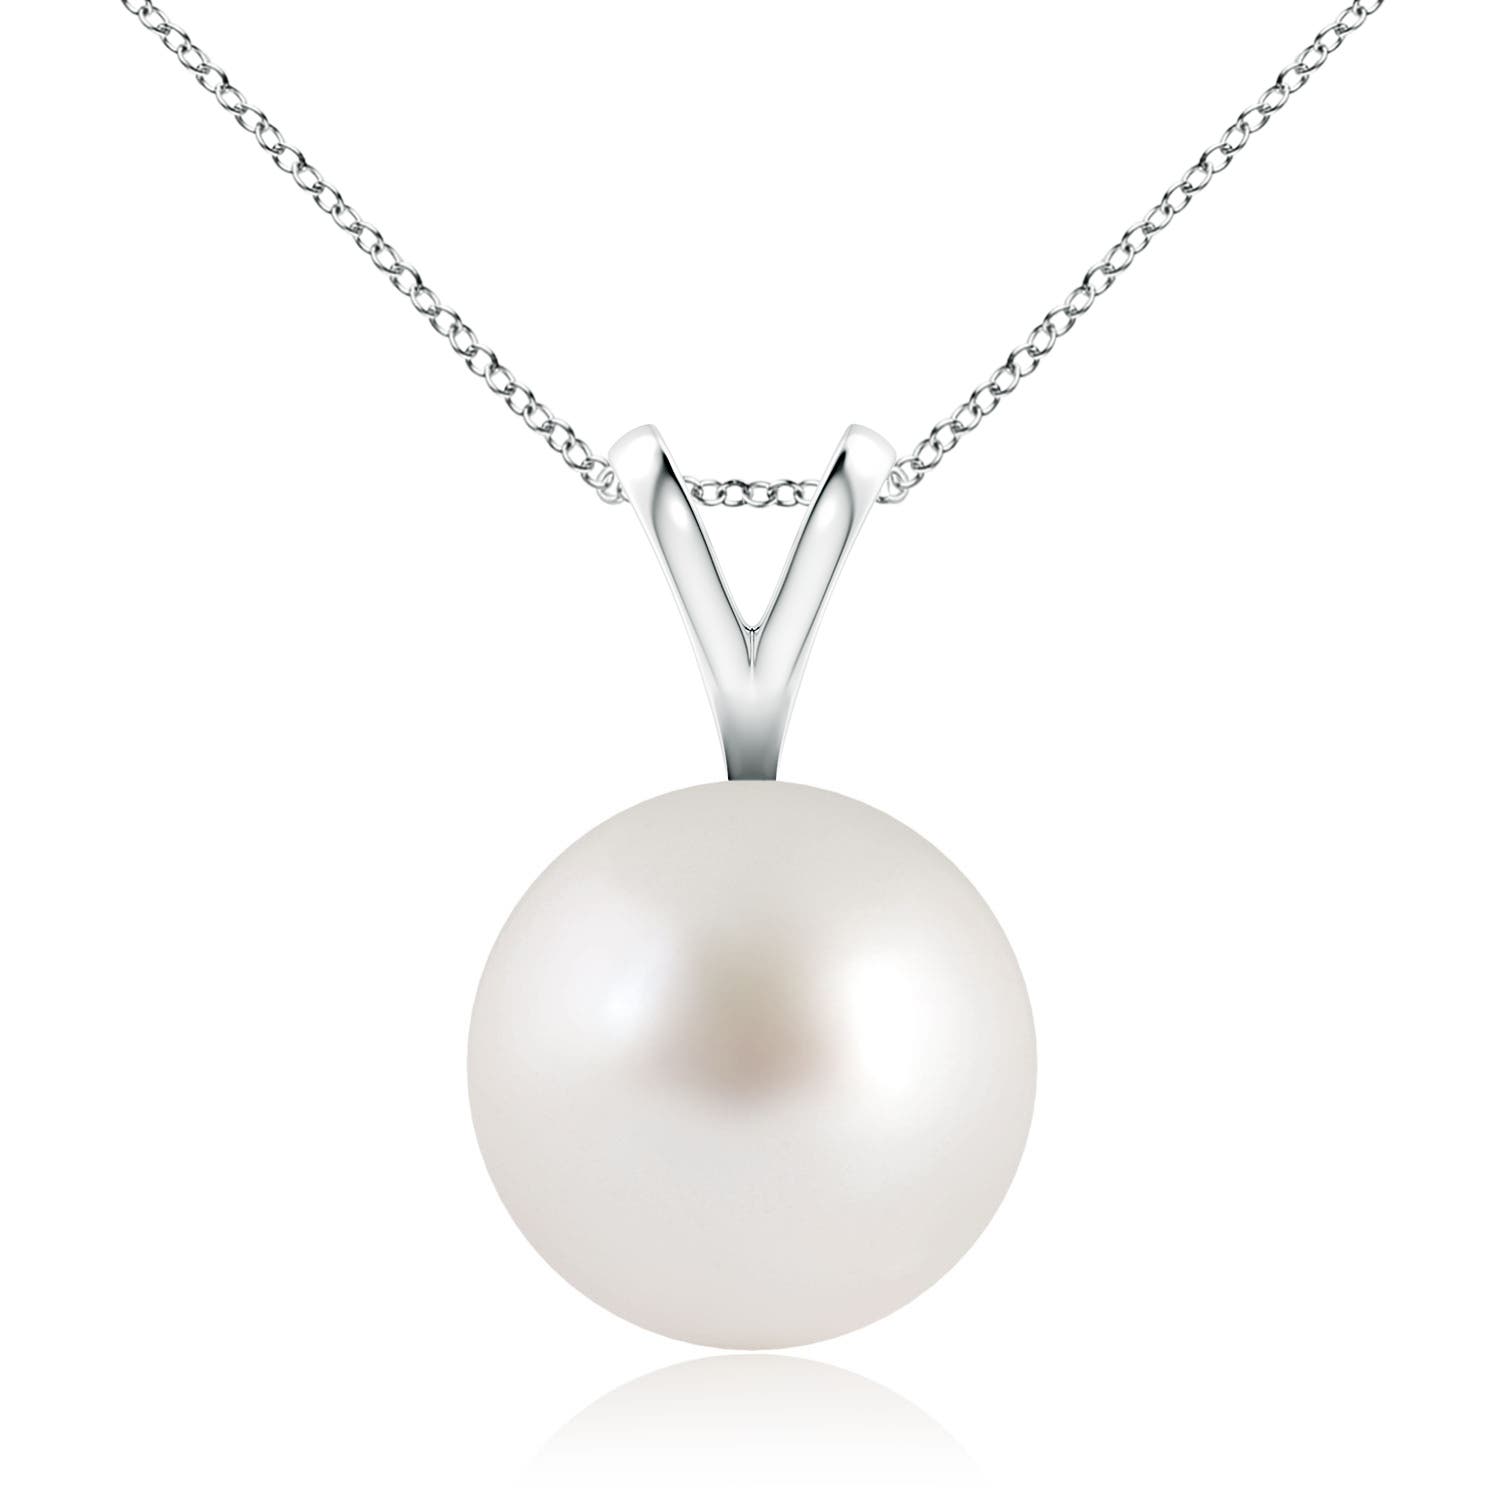 AAA - South Sea Cultured Pearl / 7.2 CT / 14 KT White Gold